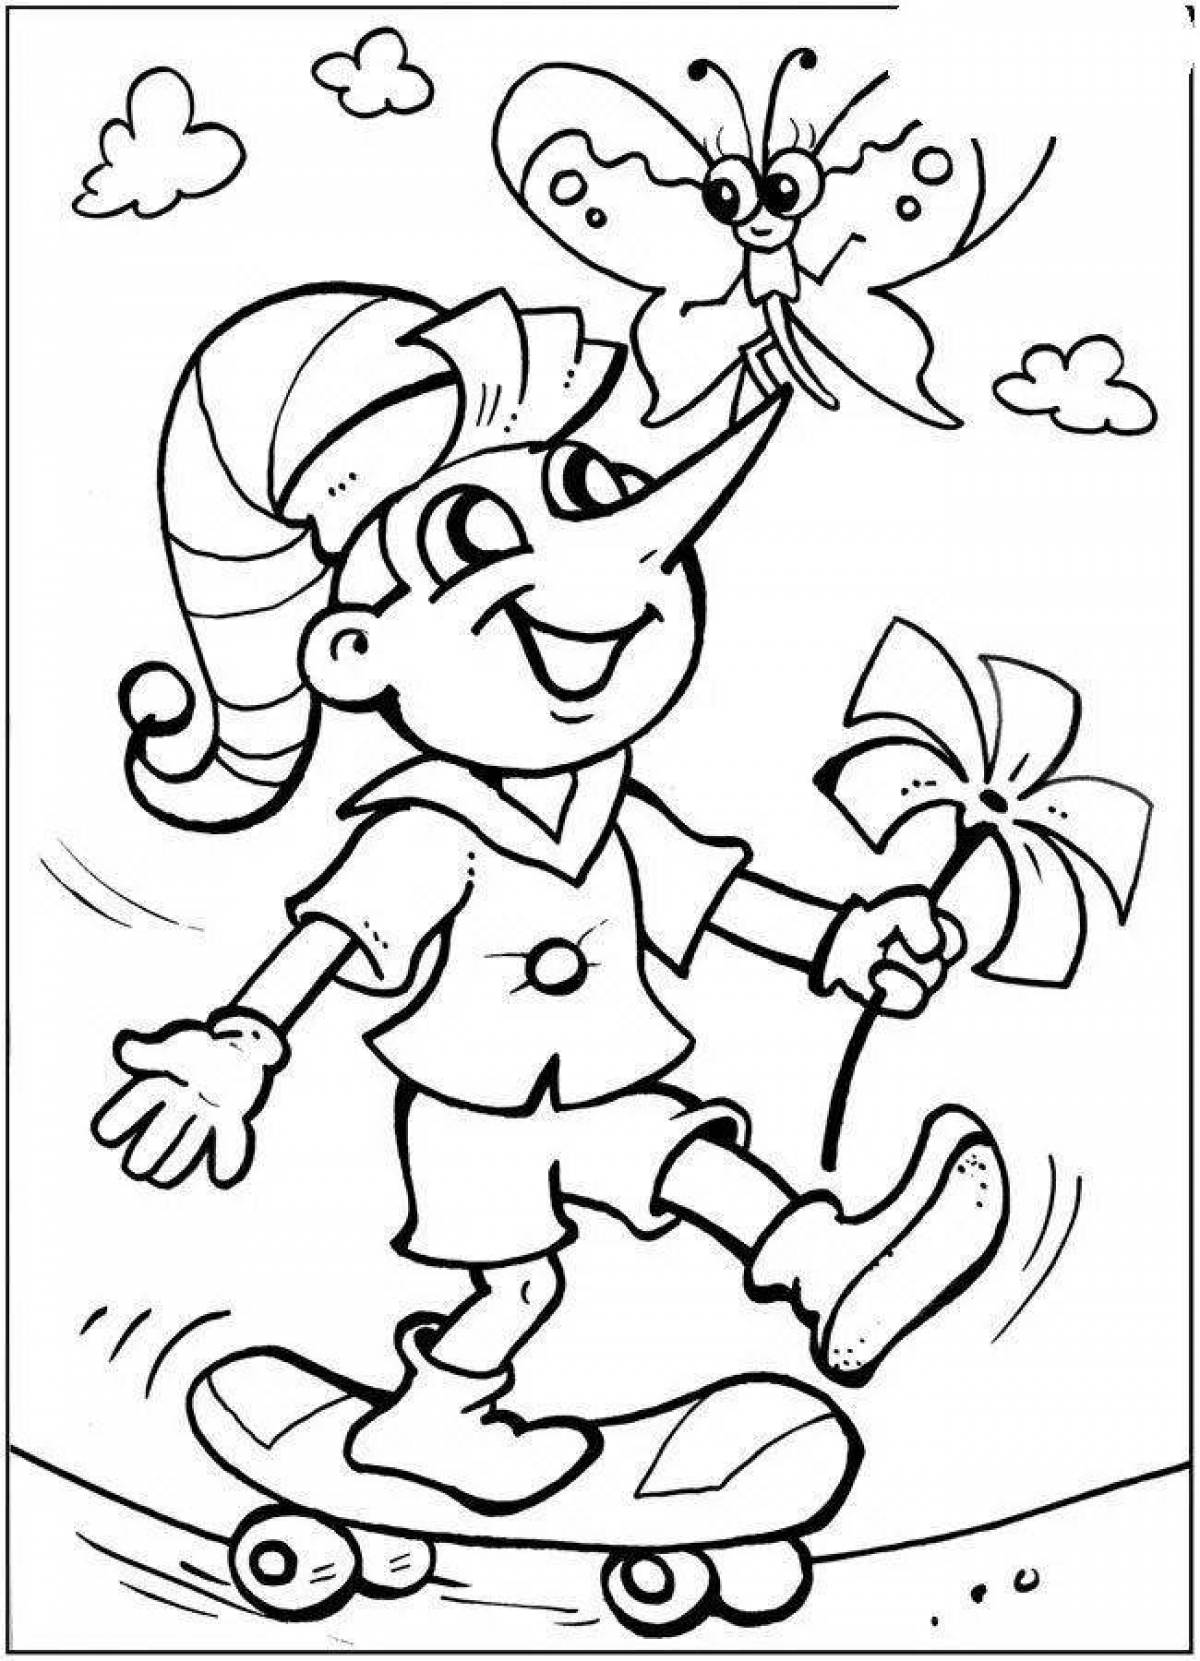 Color-frenzy coloring pages for children from cartoons 6-7 years old